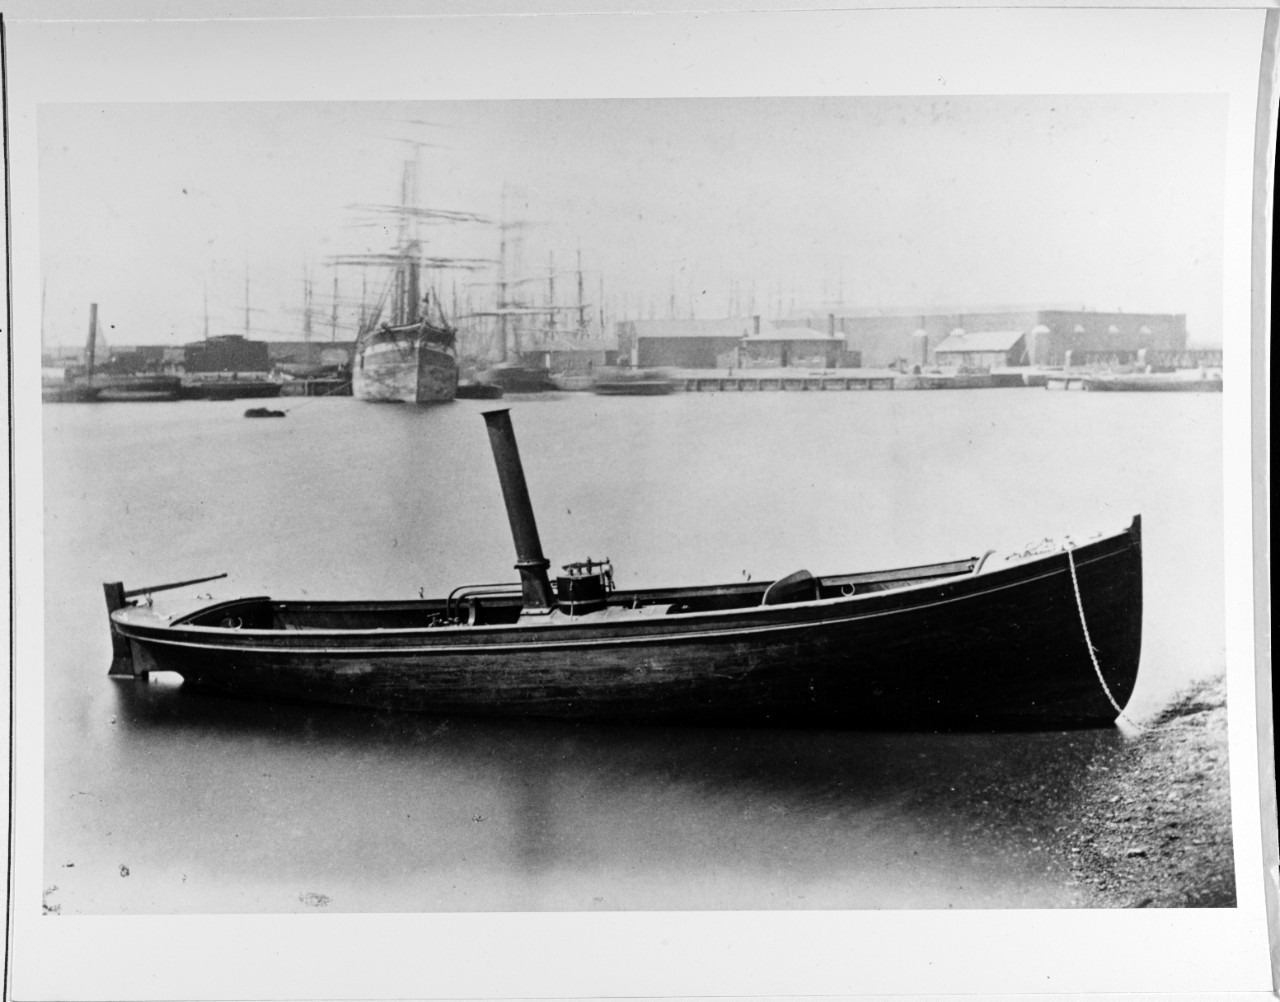 A diagonal teak-built launch, as used by large vessels to serve as steam tenders.